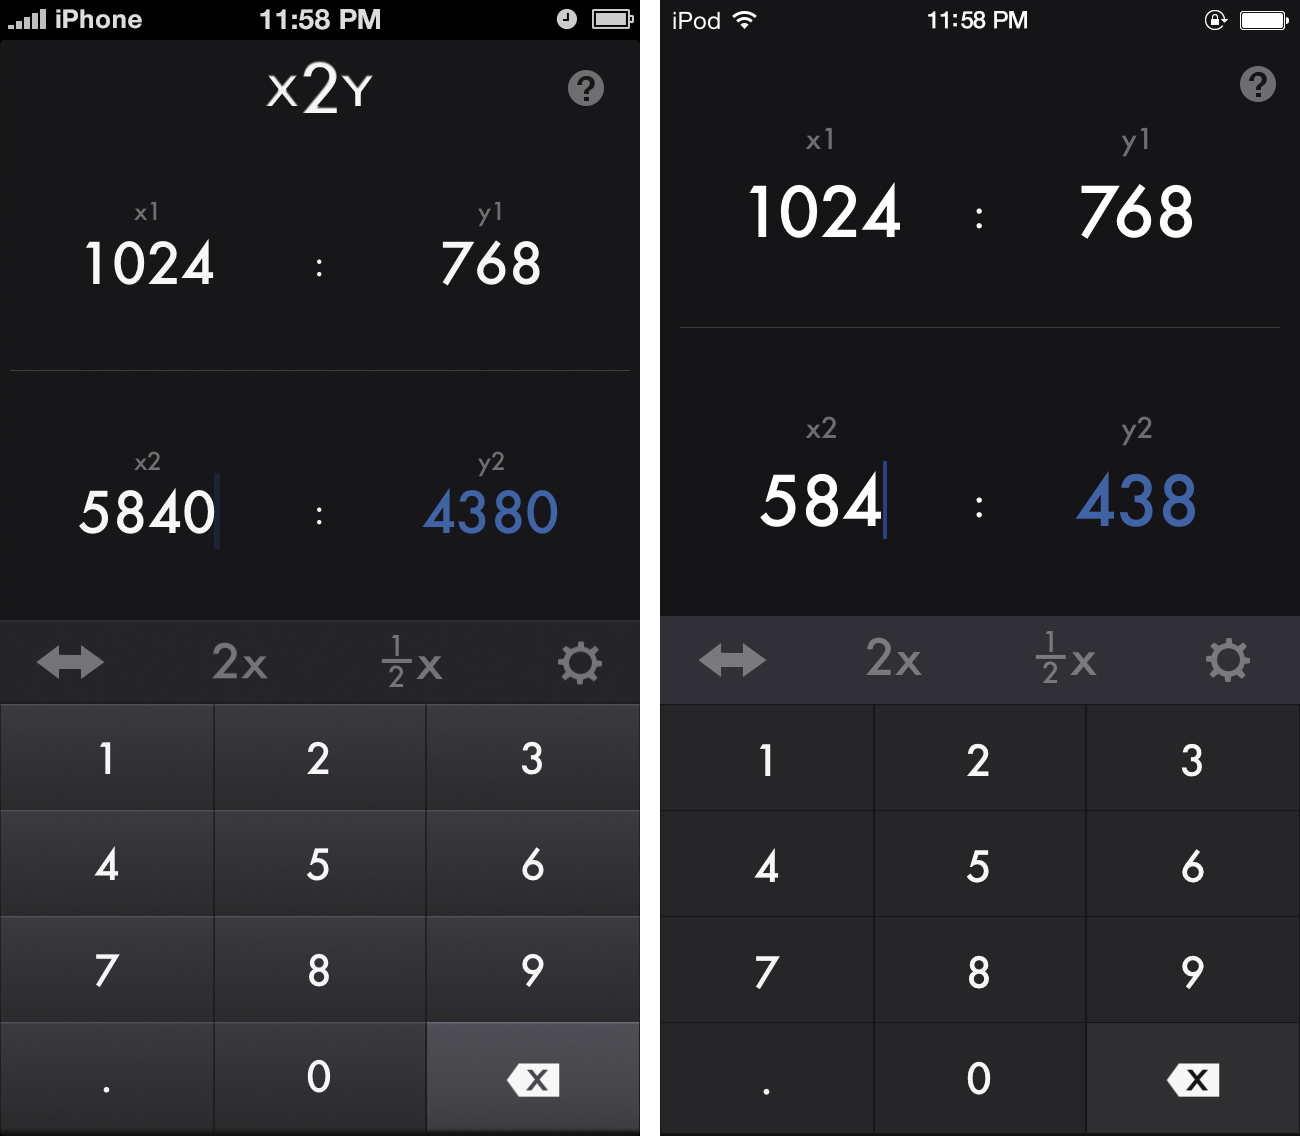 x2y in its current form on the Left. Proposed redesign for iOS 7on the right.